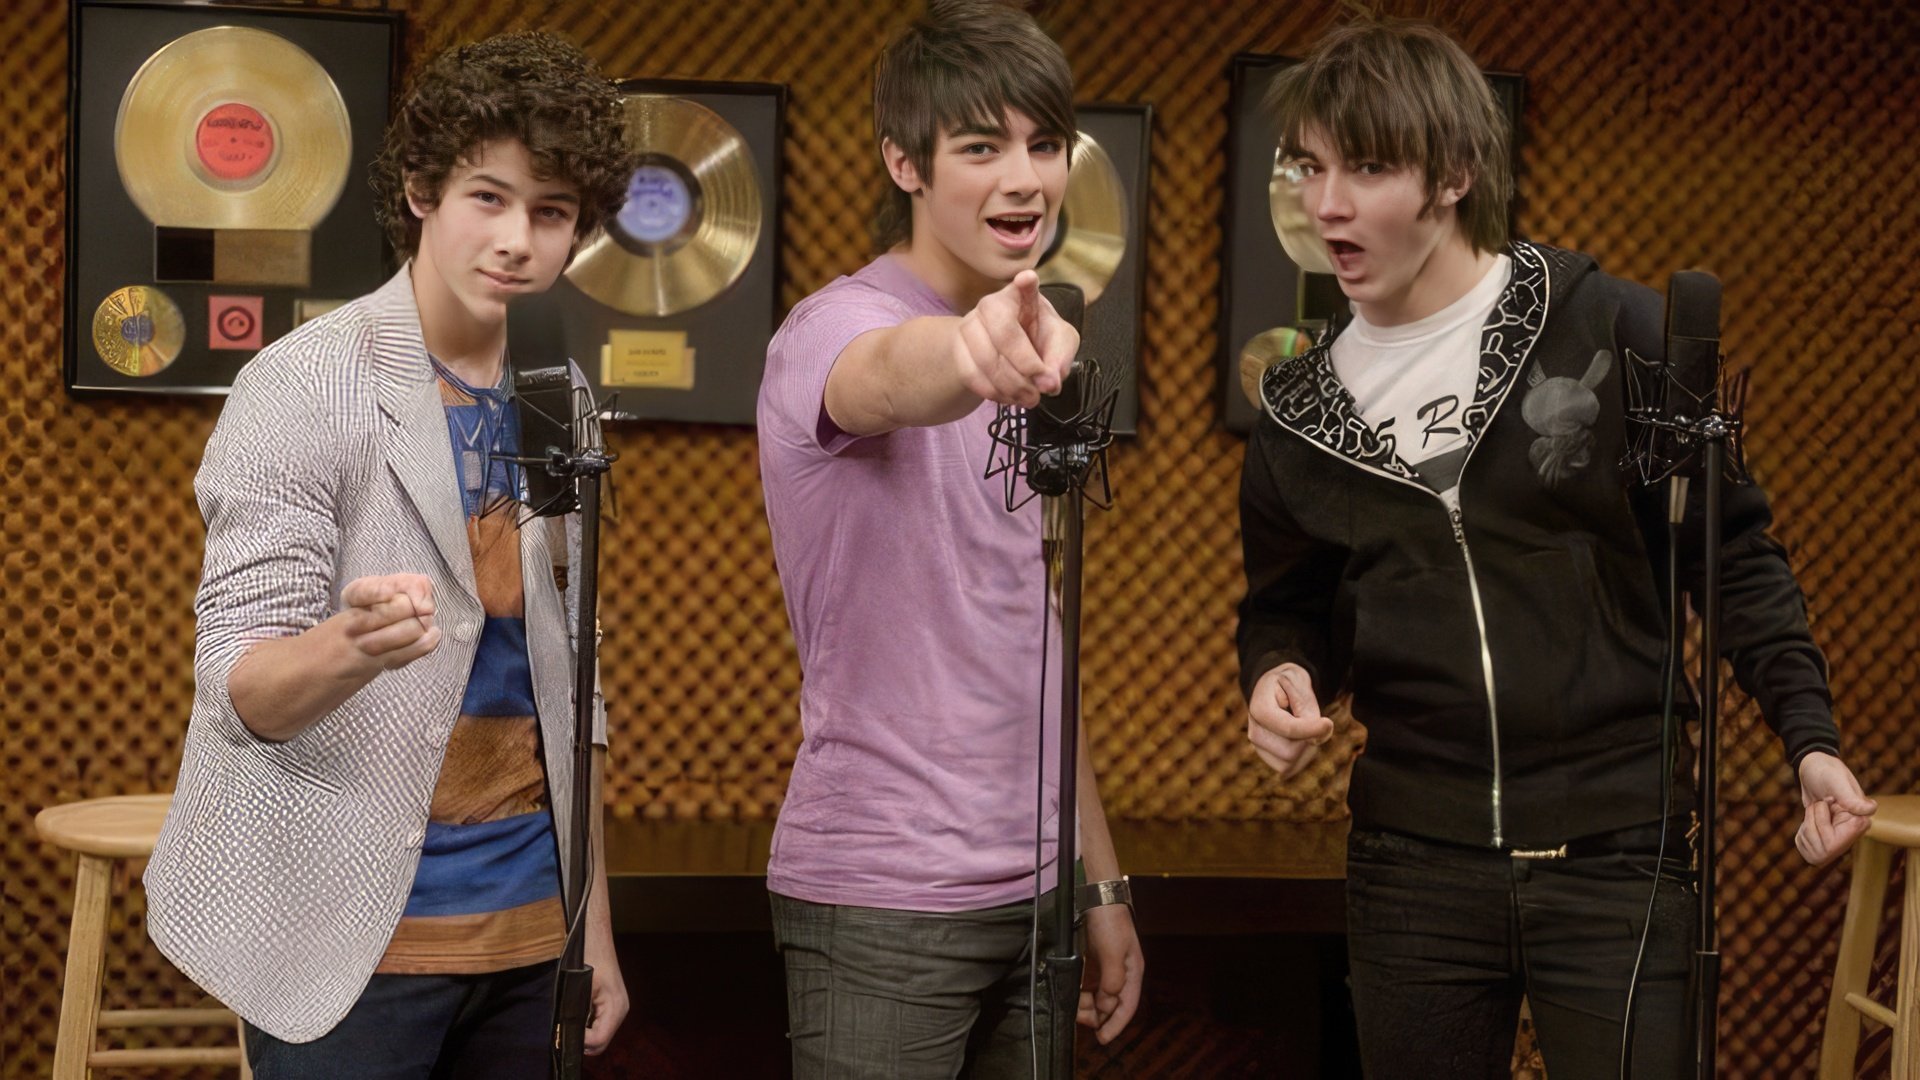 Jonas Brothers at the beginning of their musical career